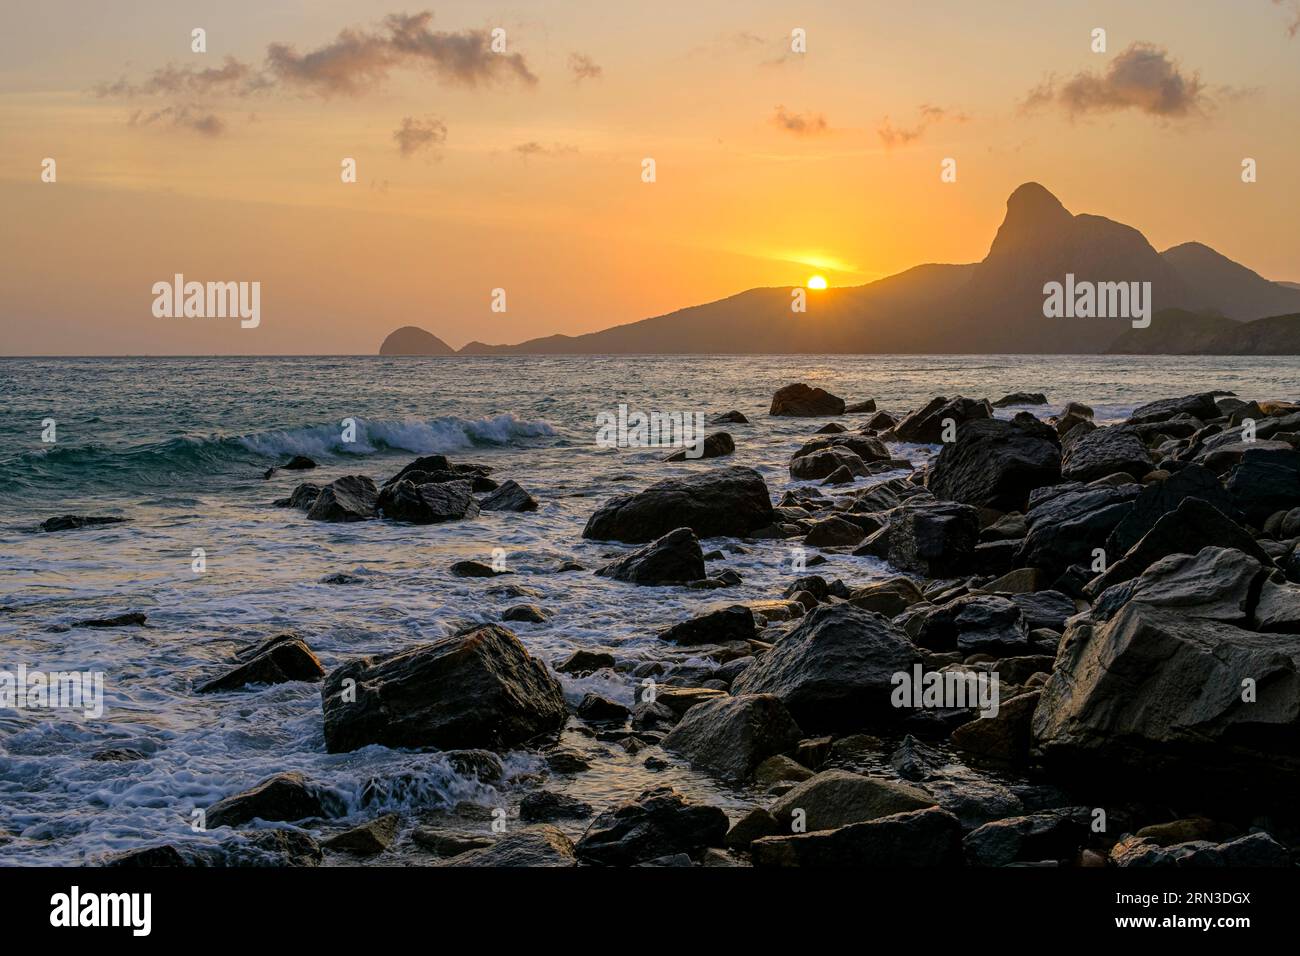 Vietnam, Archipelago of Con Dao, called Poulo-Condor islands during french colonisation, Con Son island, Nhat ou Sark Bay beach Stock Photo